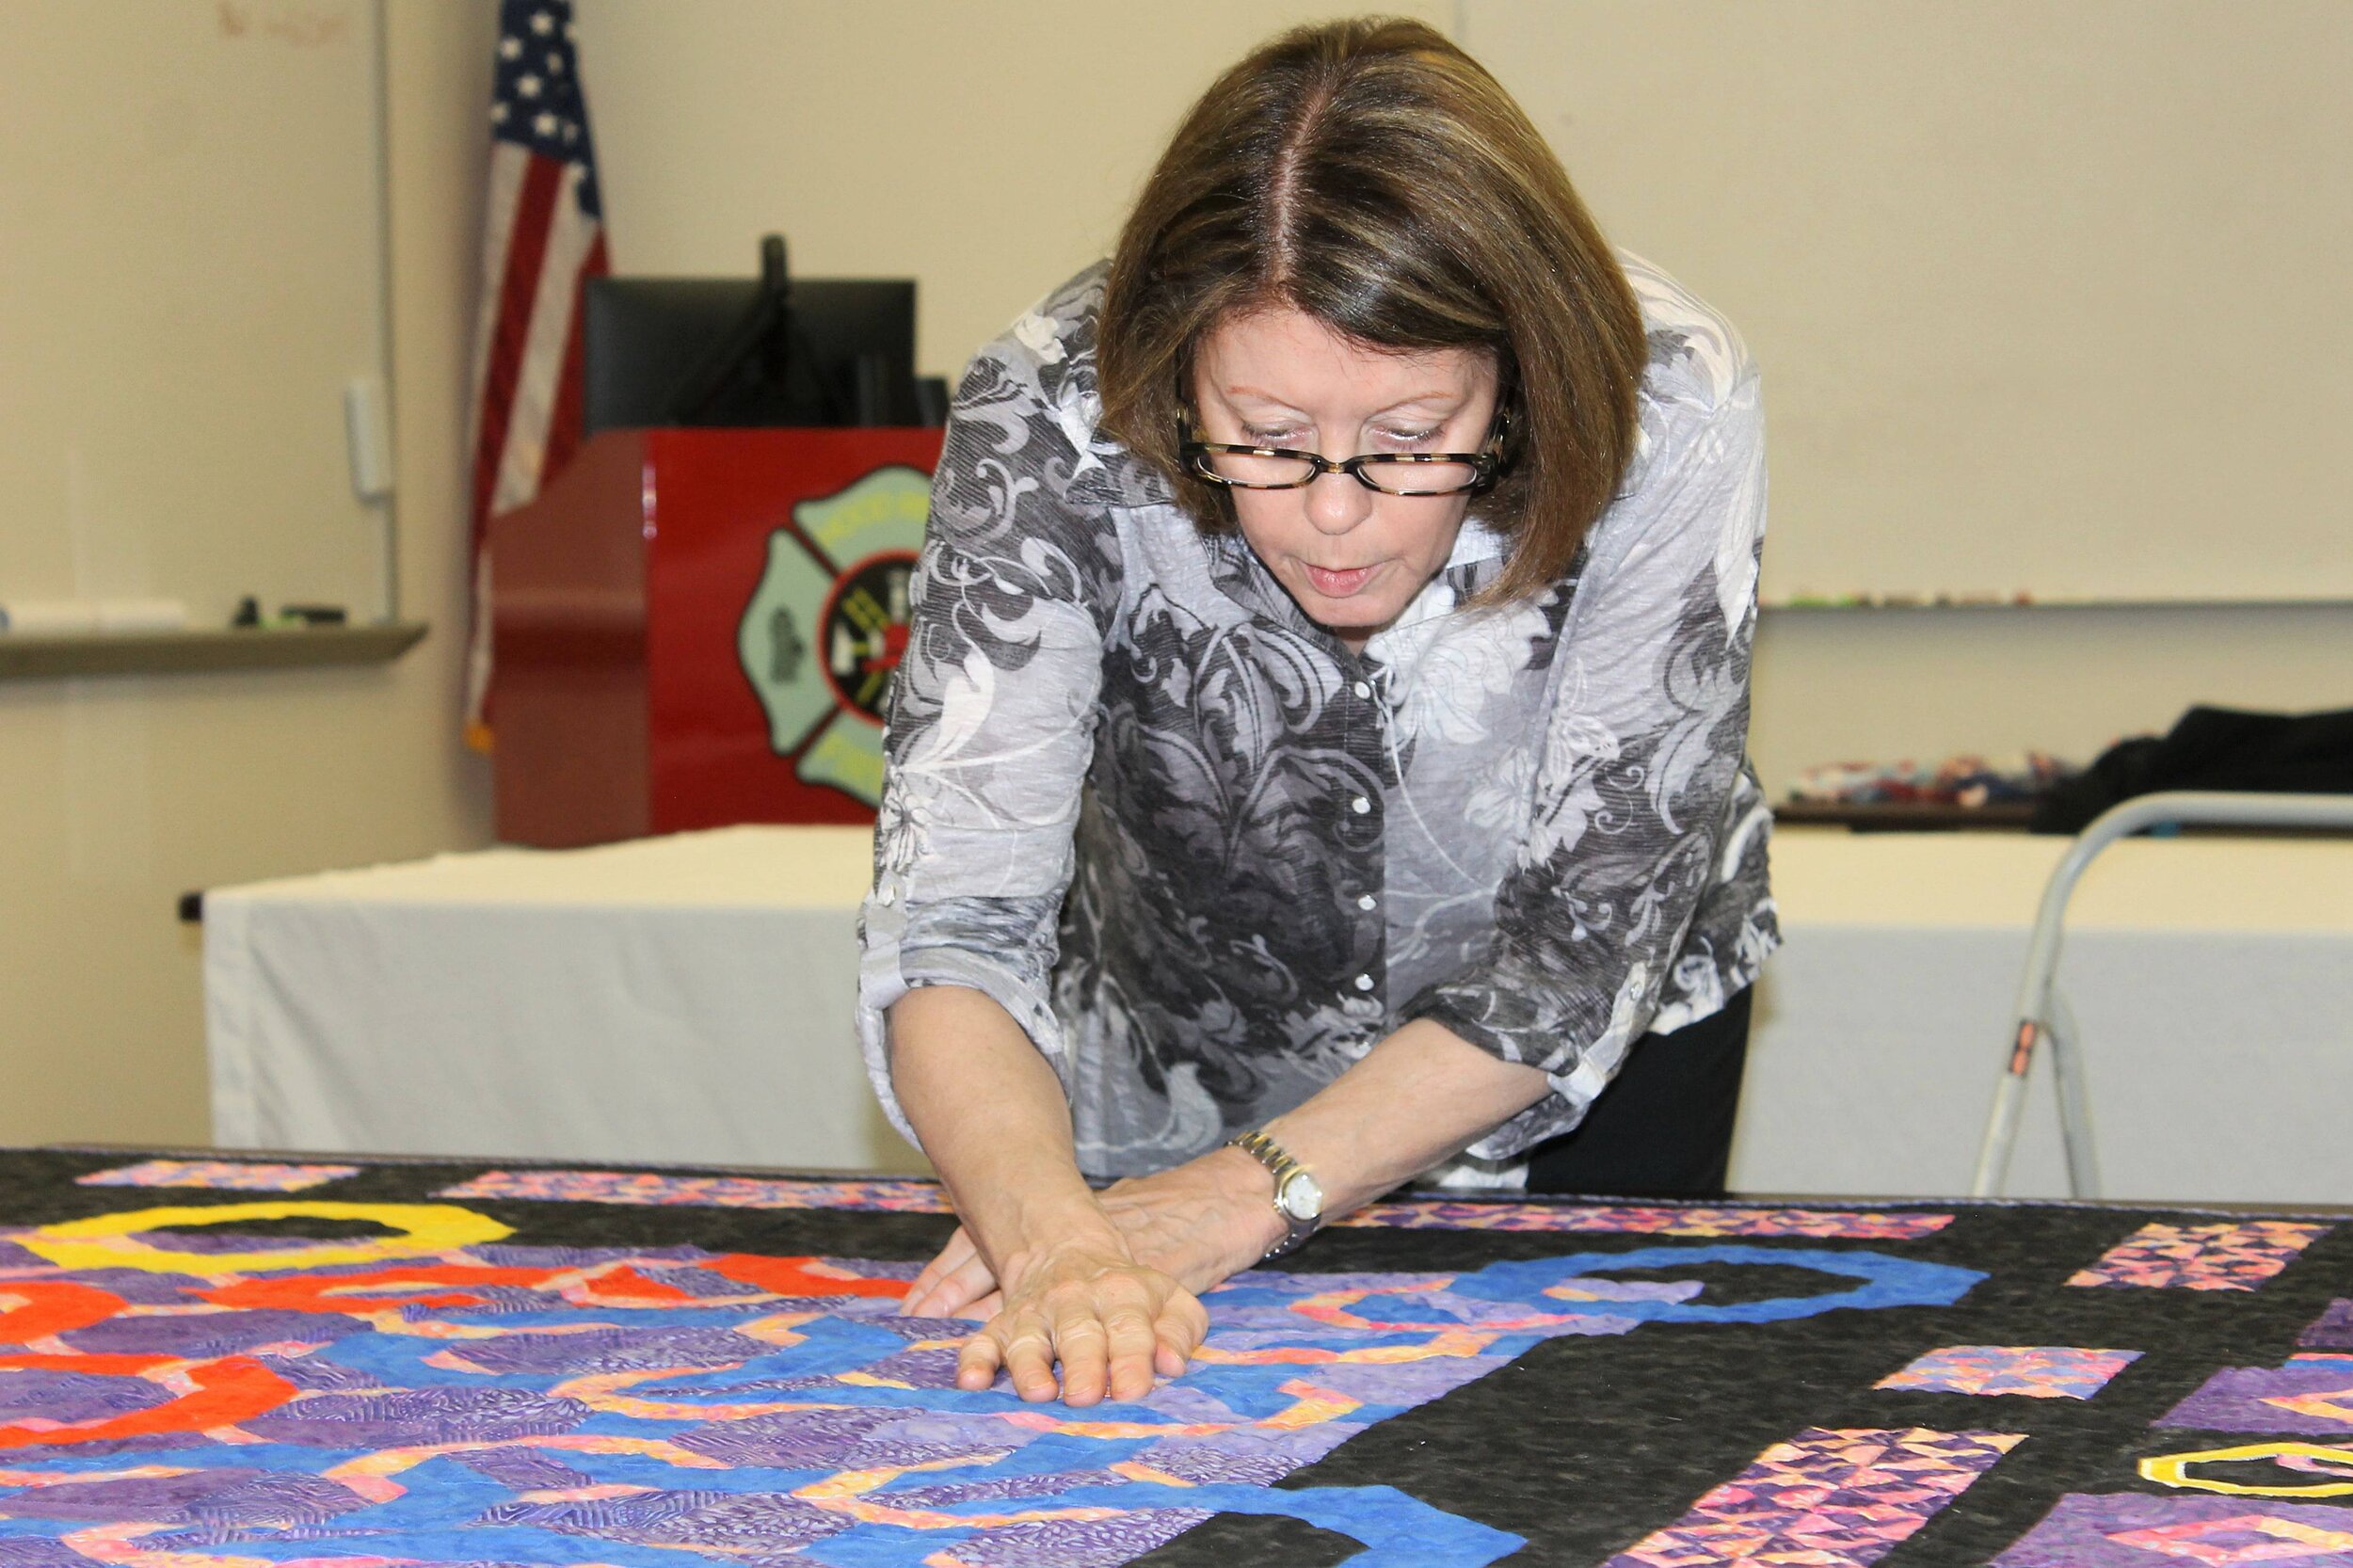 Judging-hands on the quilt.JPG